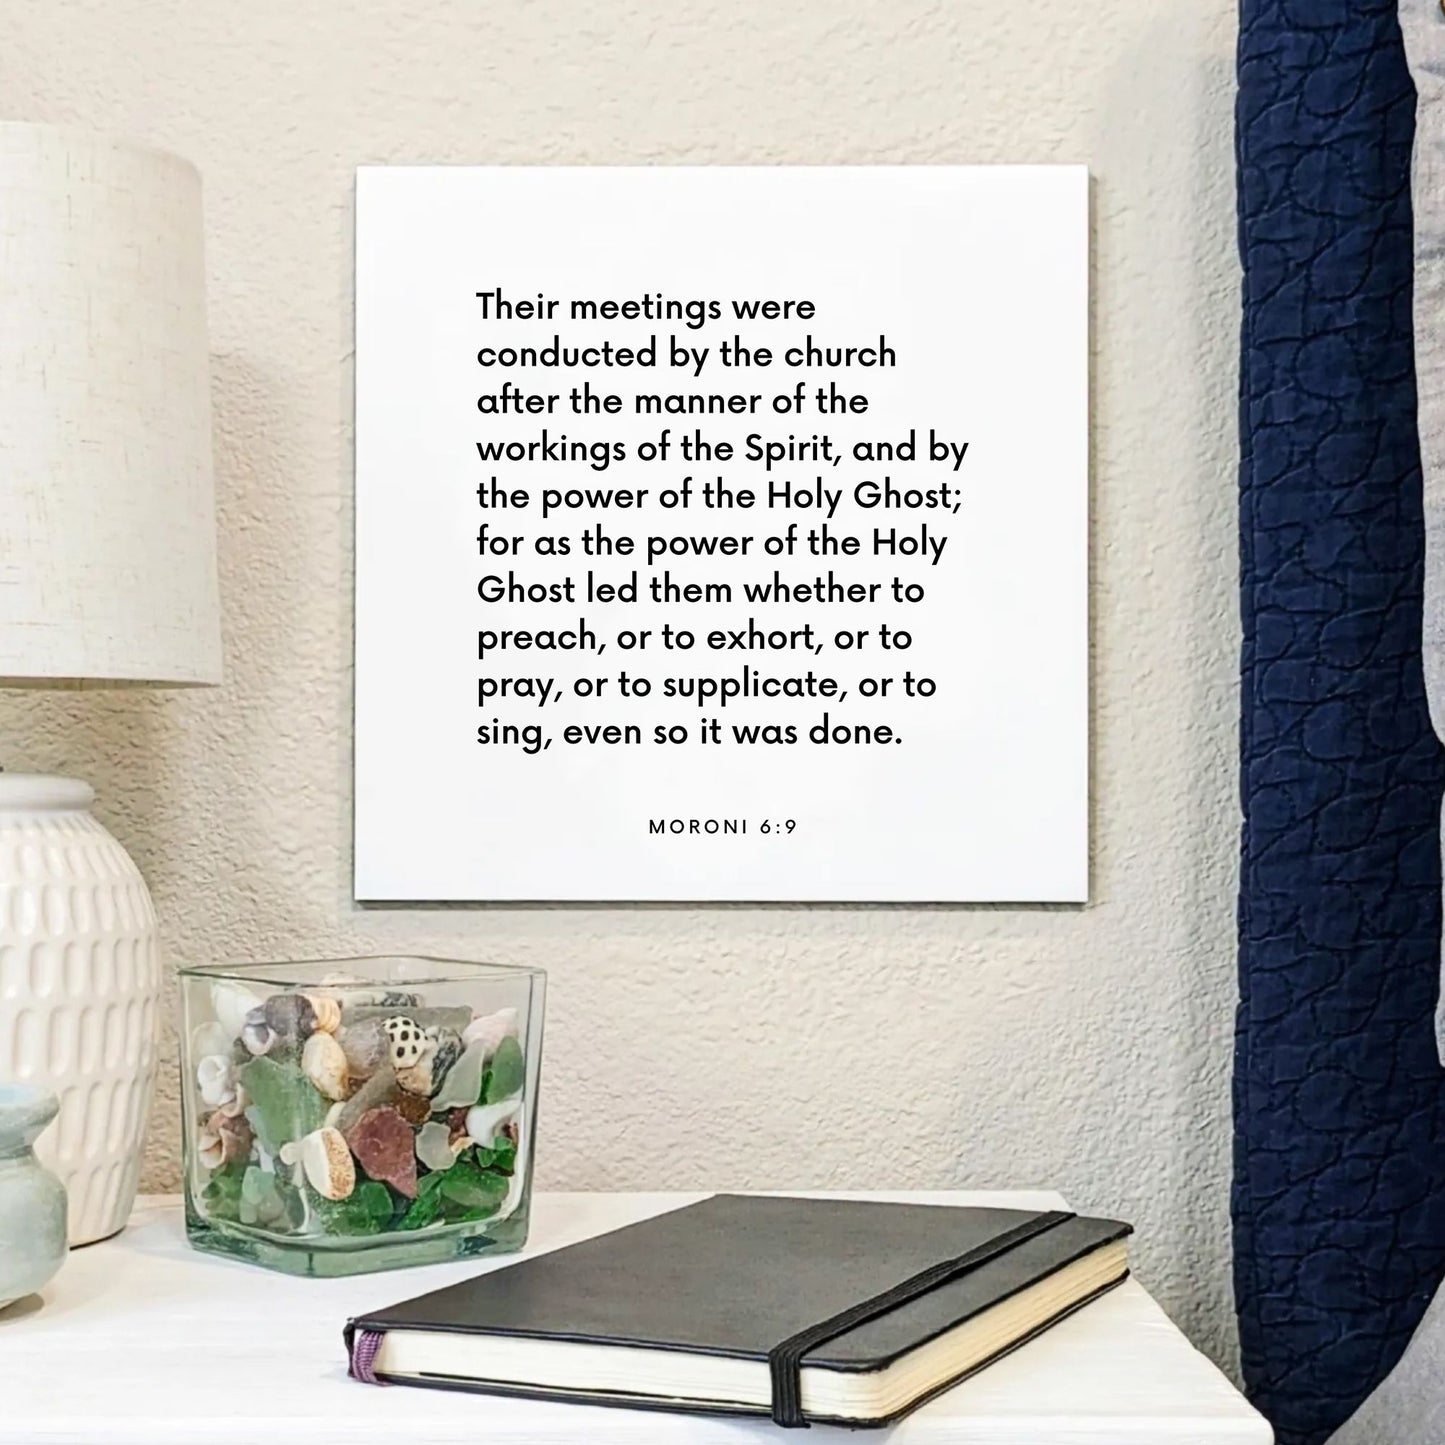 Bedside mouting of the scripture tile for Moroni 6:9 - "Their meetings were conducted by the Spirit"